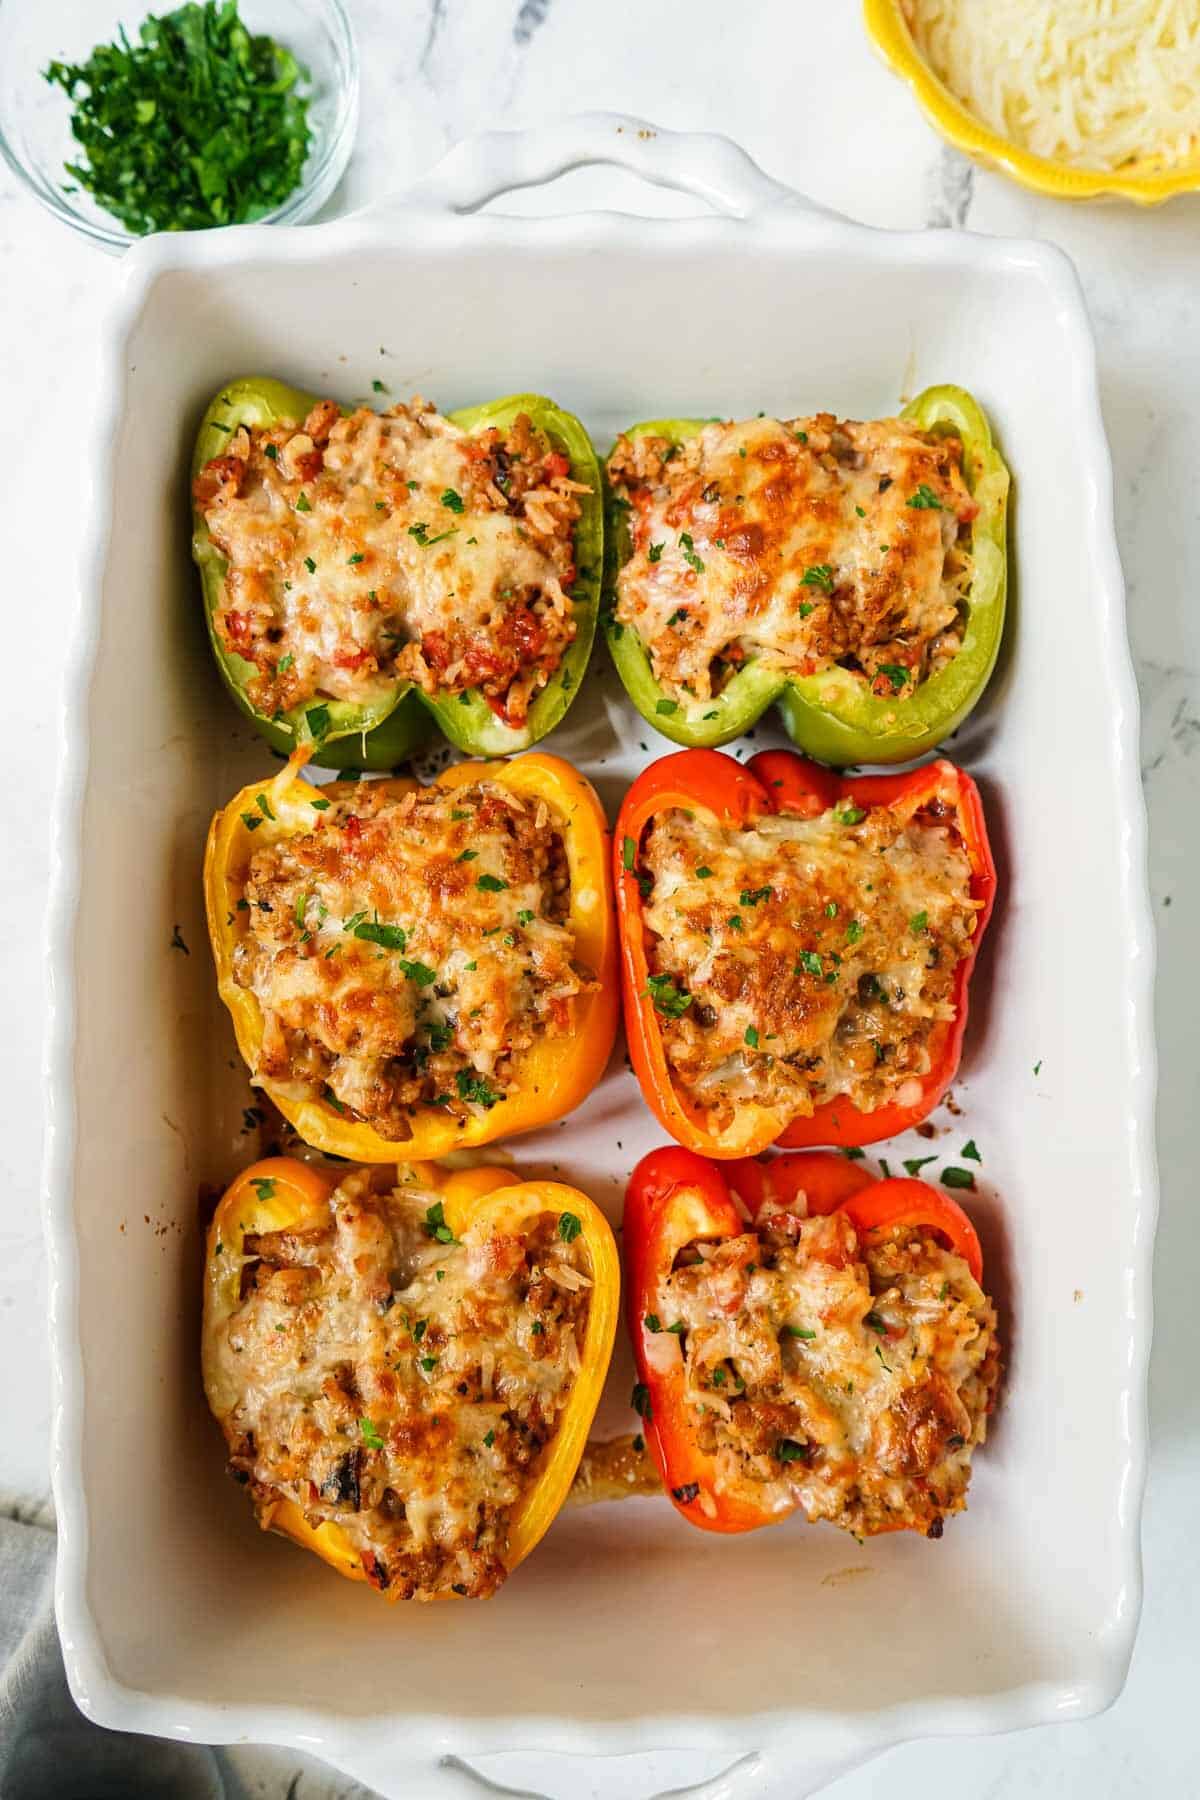 Bell peppers that are filled with stuffing in a white casserole dish after being cooked.